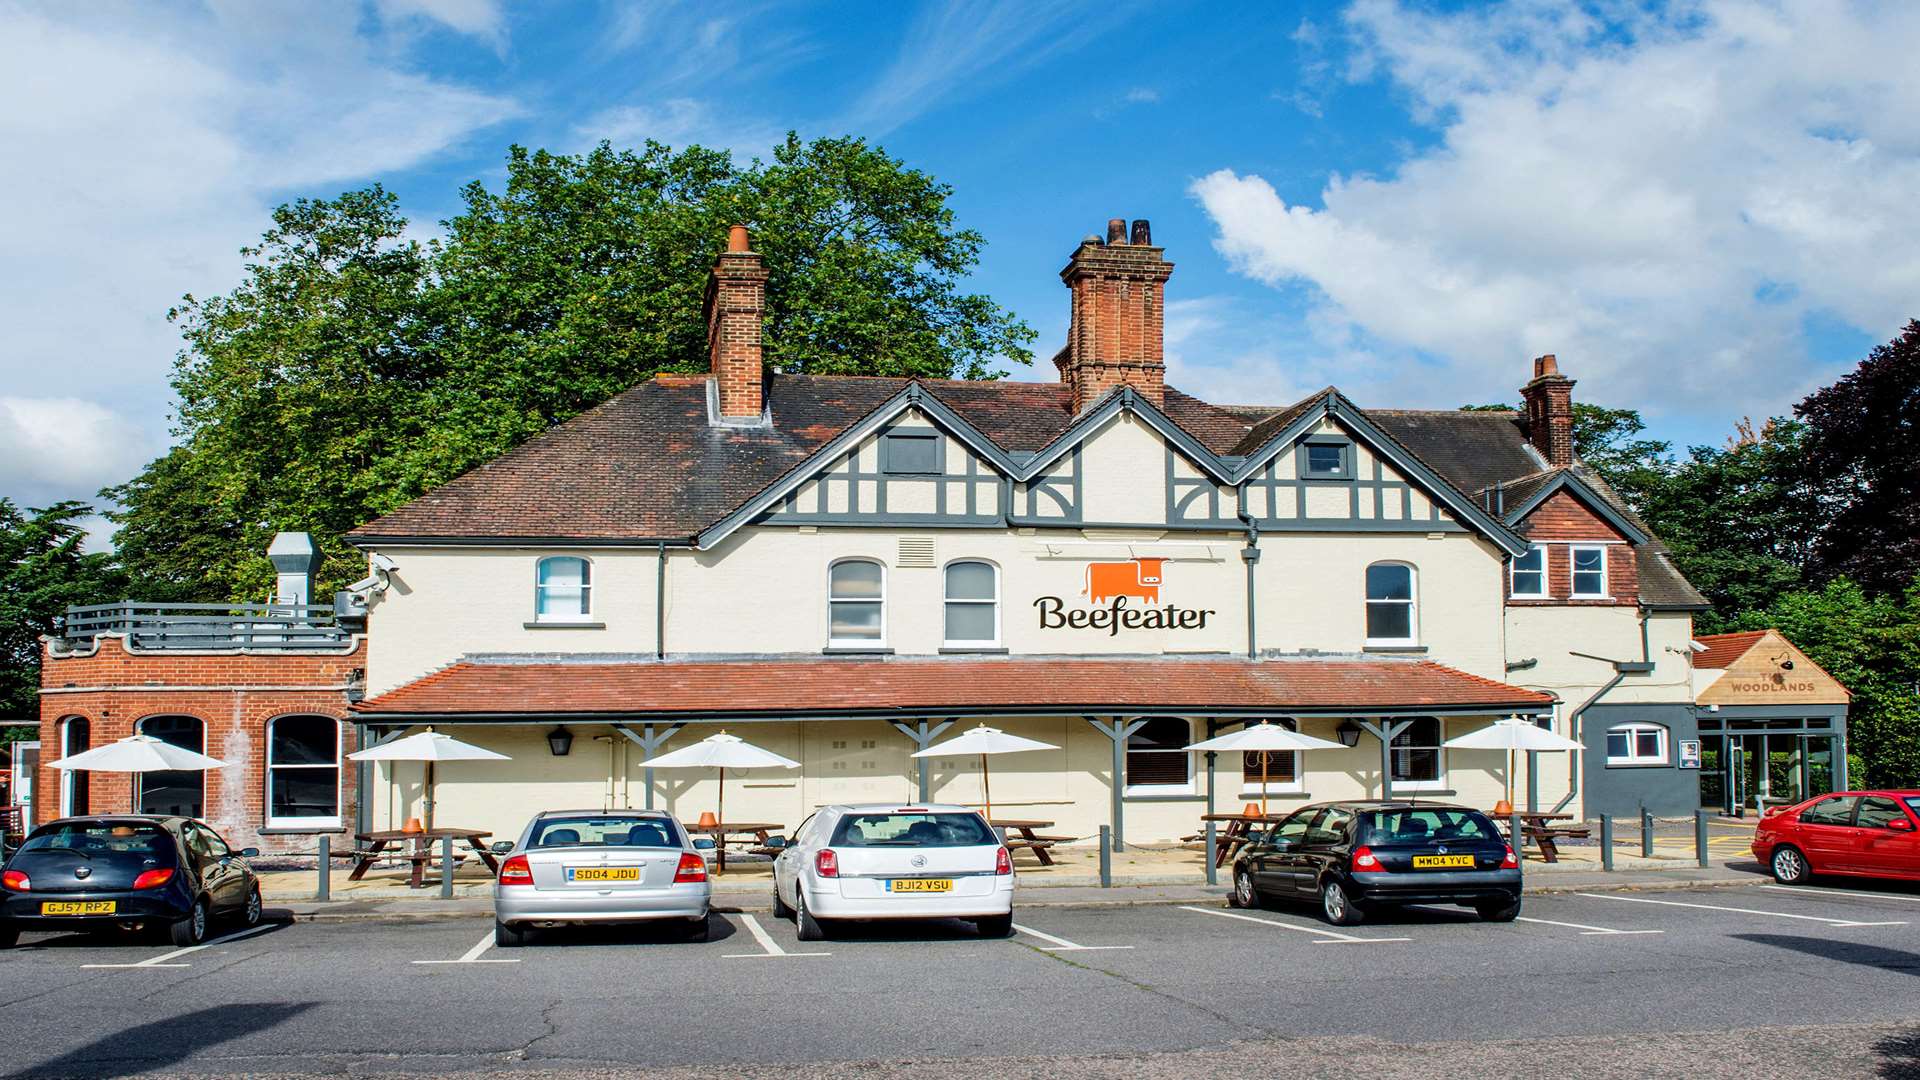 Woodlands Beefeater was reopened after a £200,000 makeover